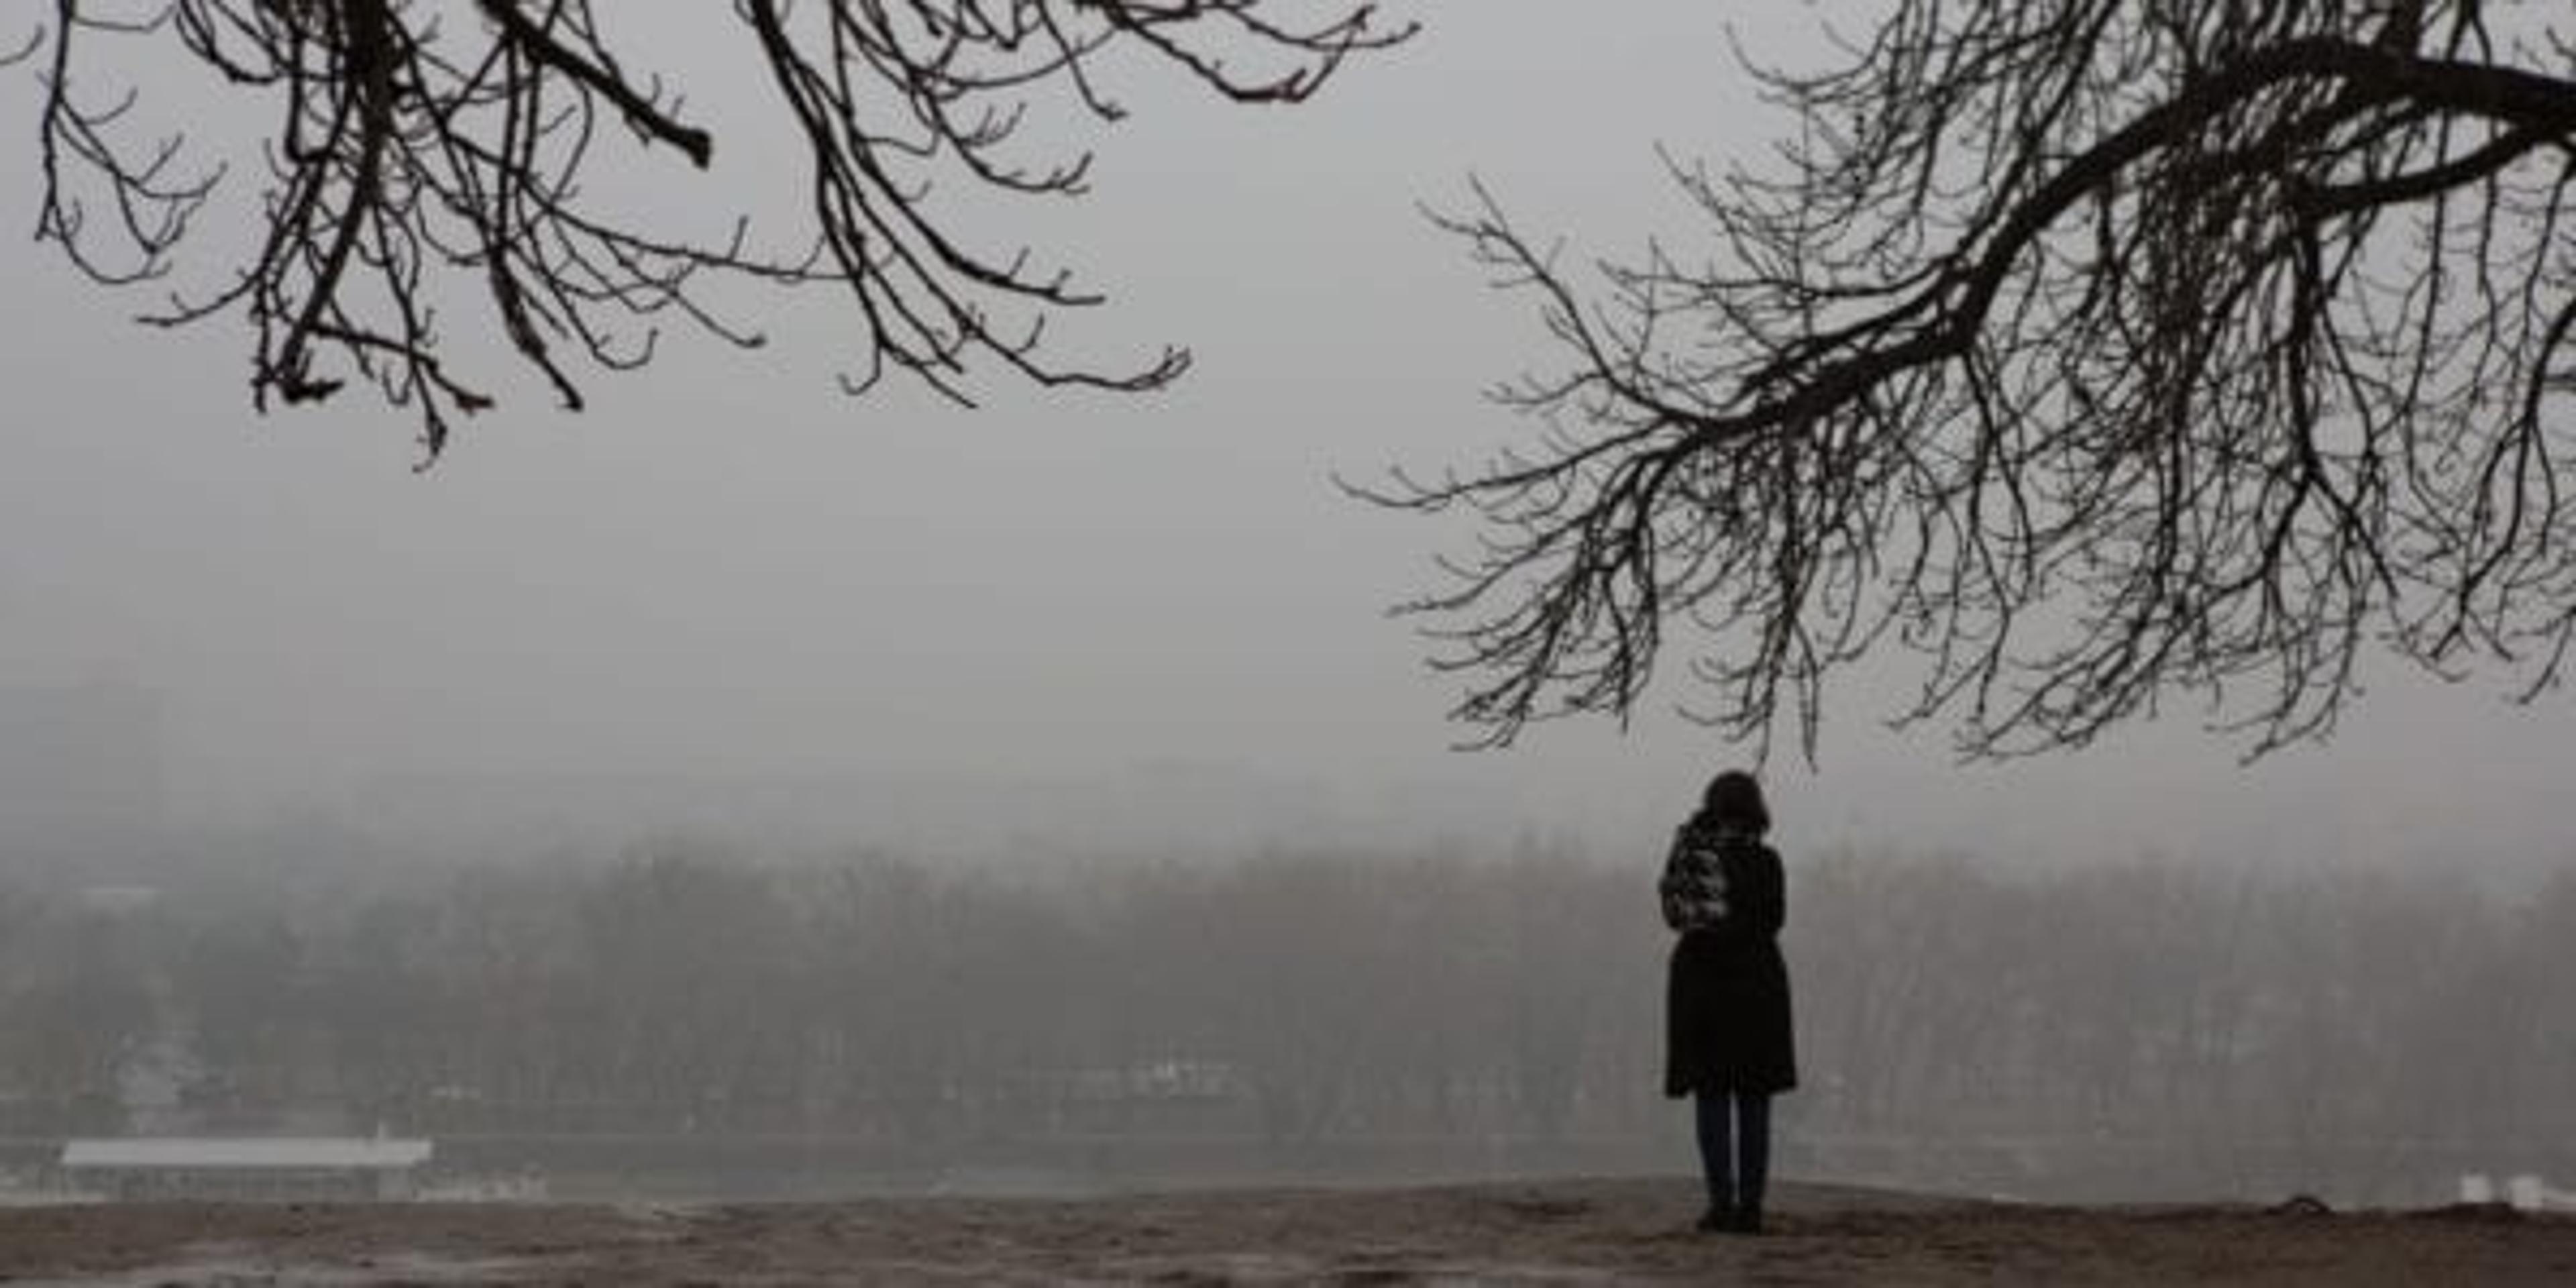 Girl standing alone on a cloudy gloomy day